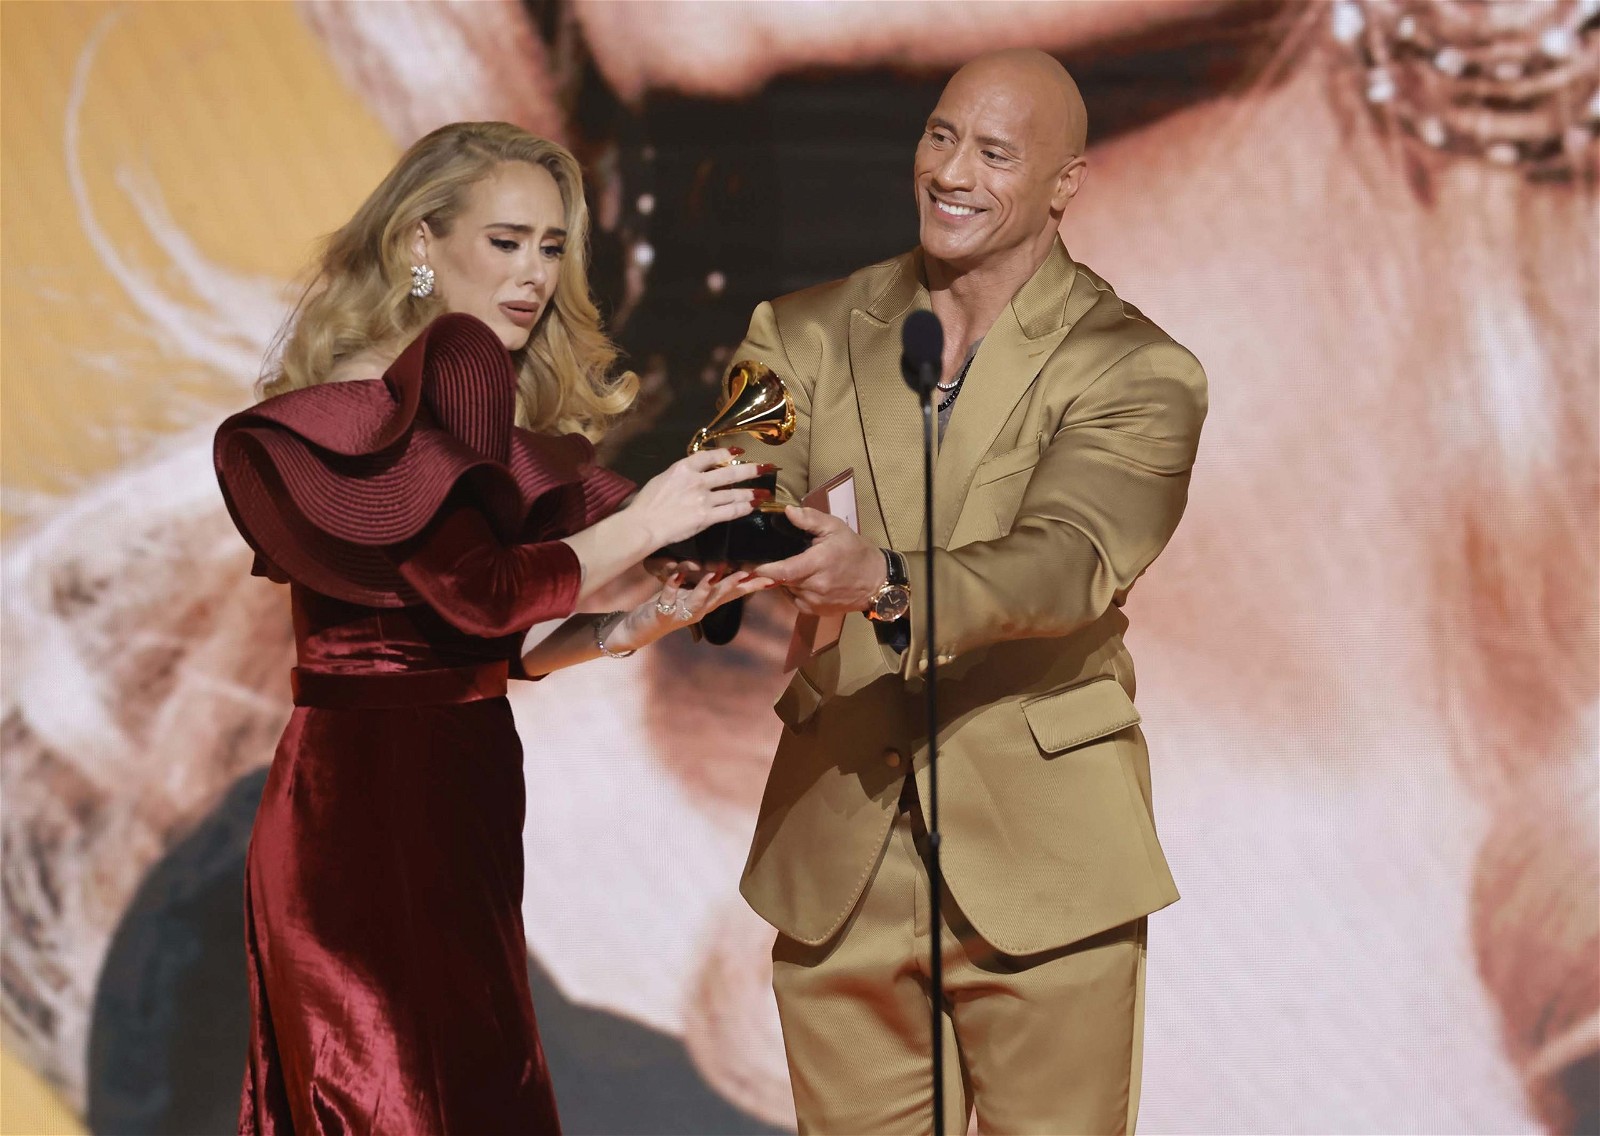 Adele was finally able to meet The Rock at the Grammys.